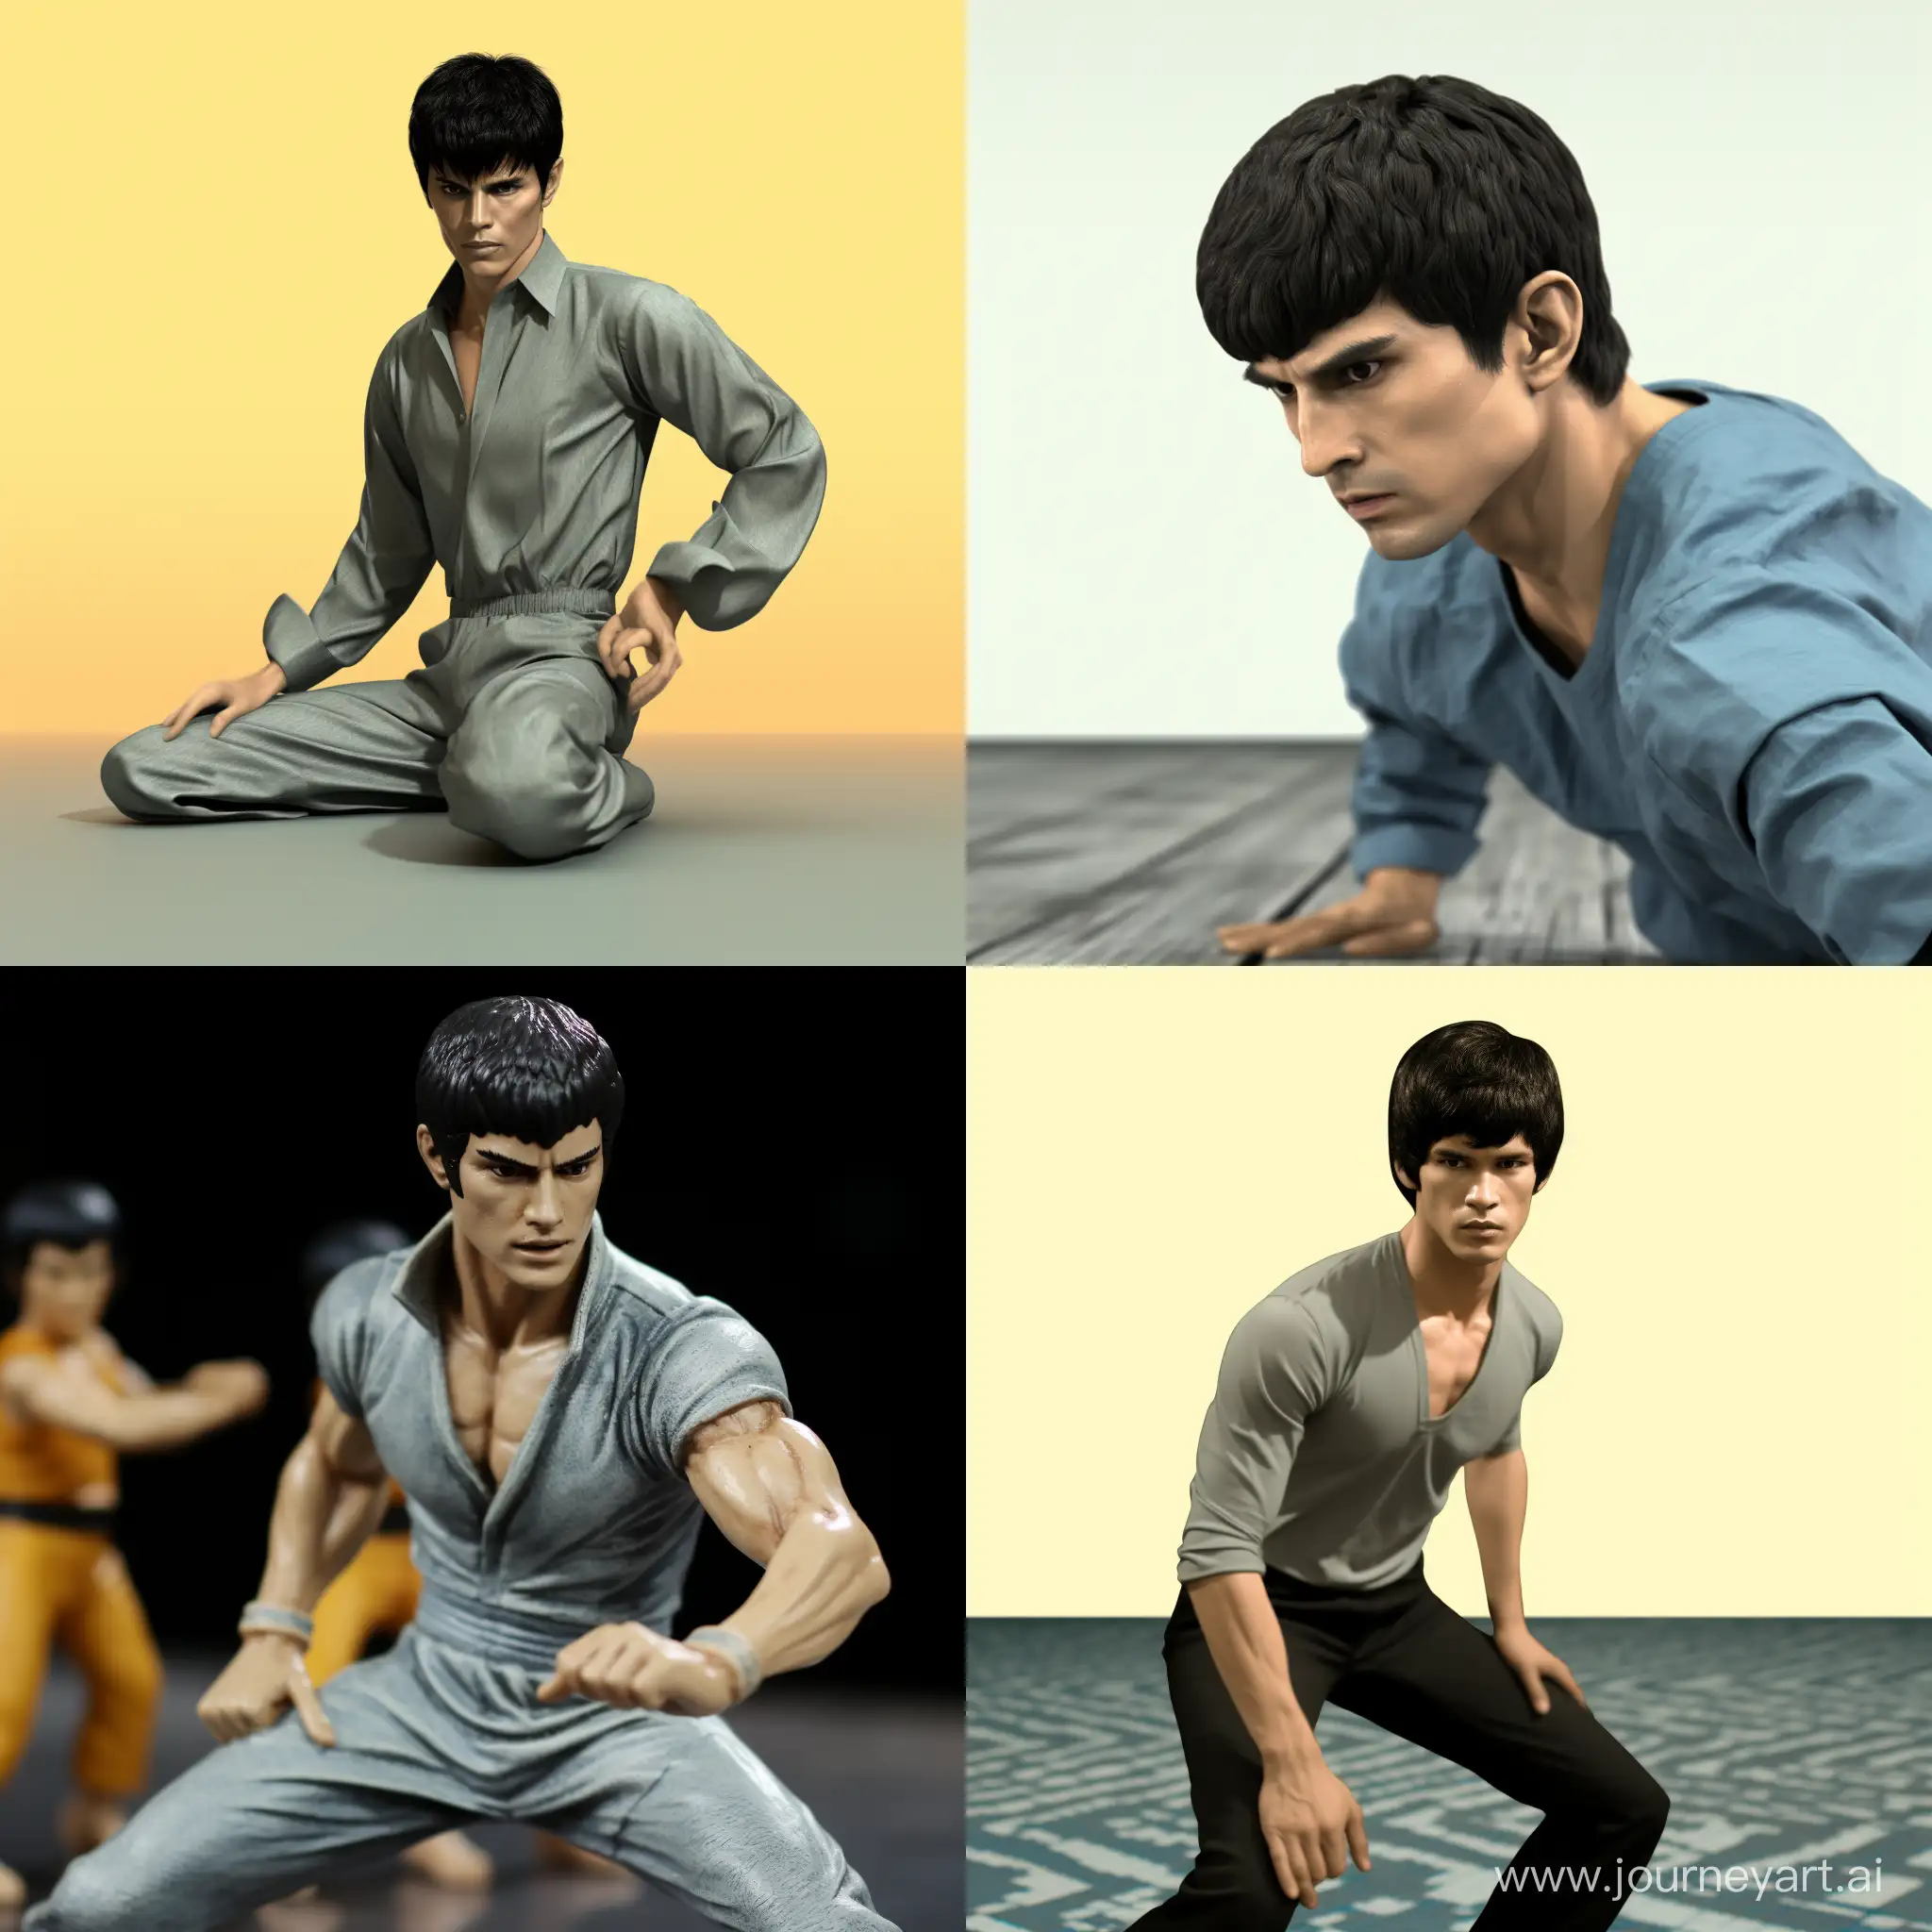 Bruce-Lee-3D-Artwork-with-Aspect-Ratio-11-Martial-Arts-Legend-in-Dynamic-Pose